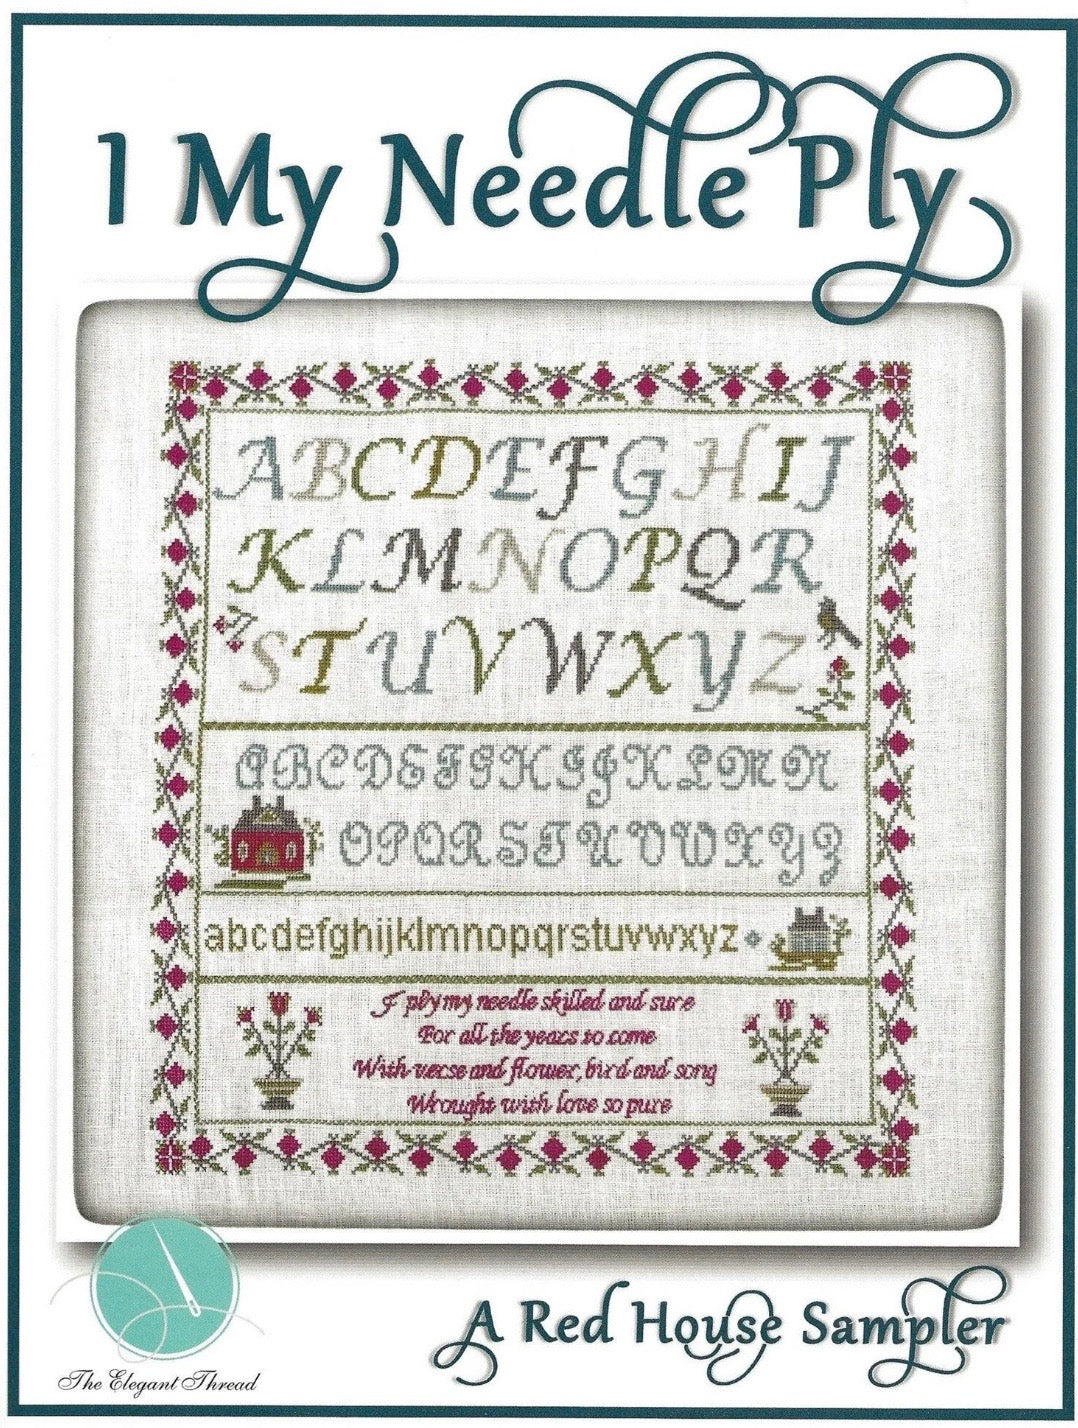 I My Needle Ply - A Red House Sampler